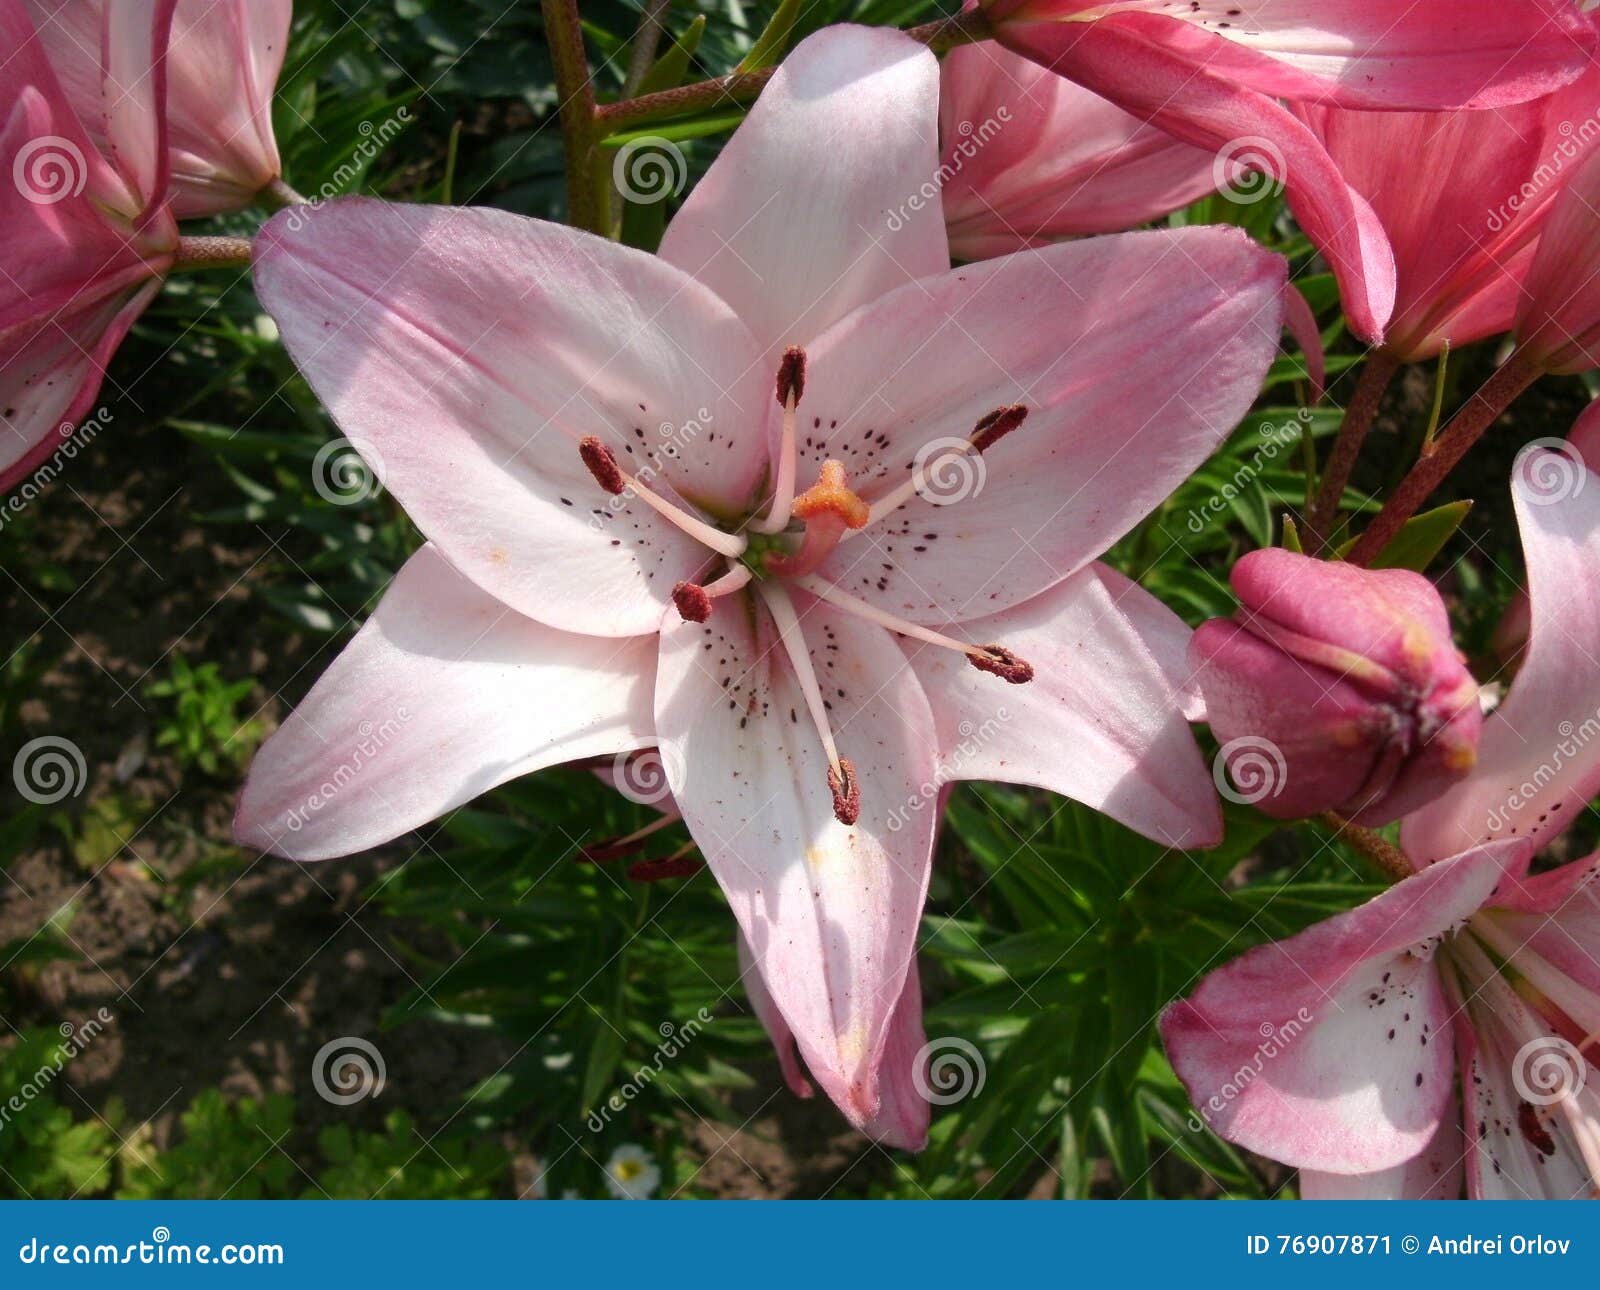 Open pink lily stock image. Image of park, petals, garden - 76907871